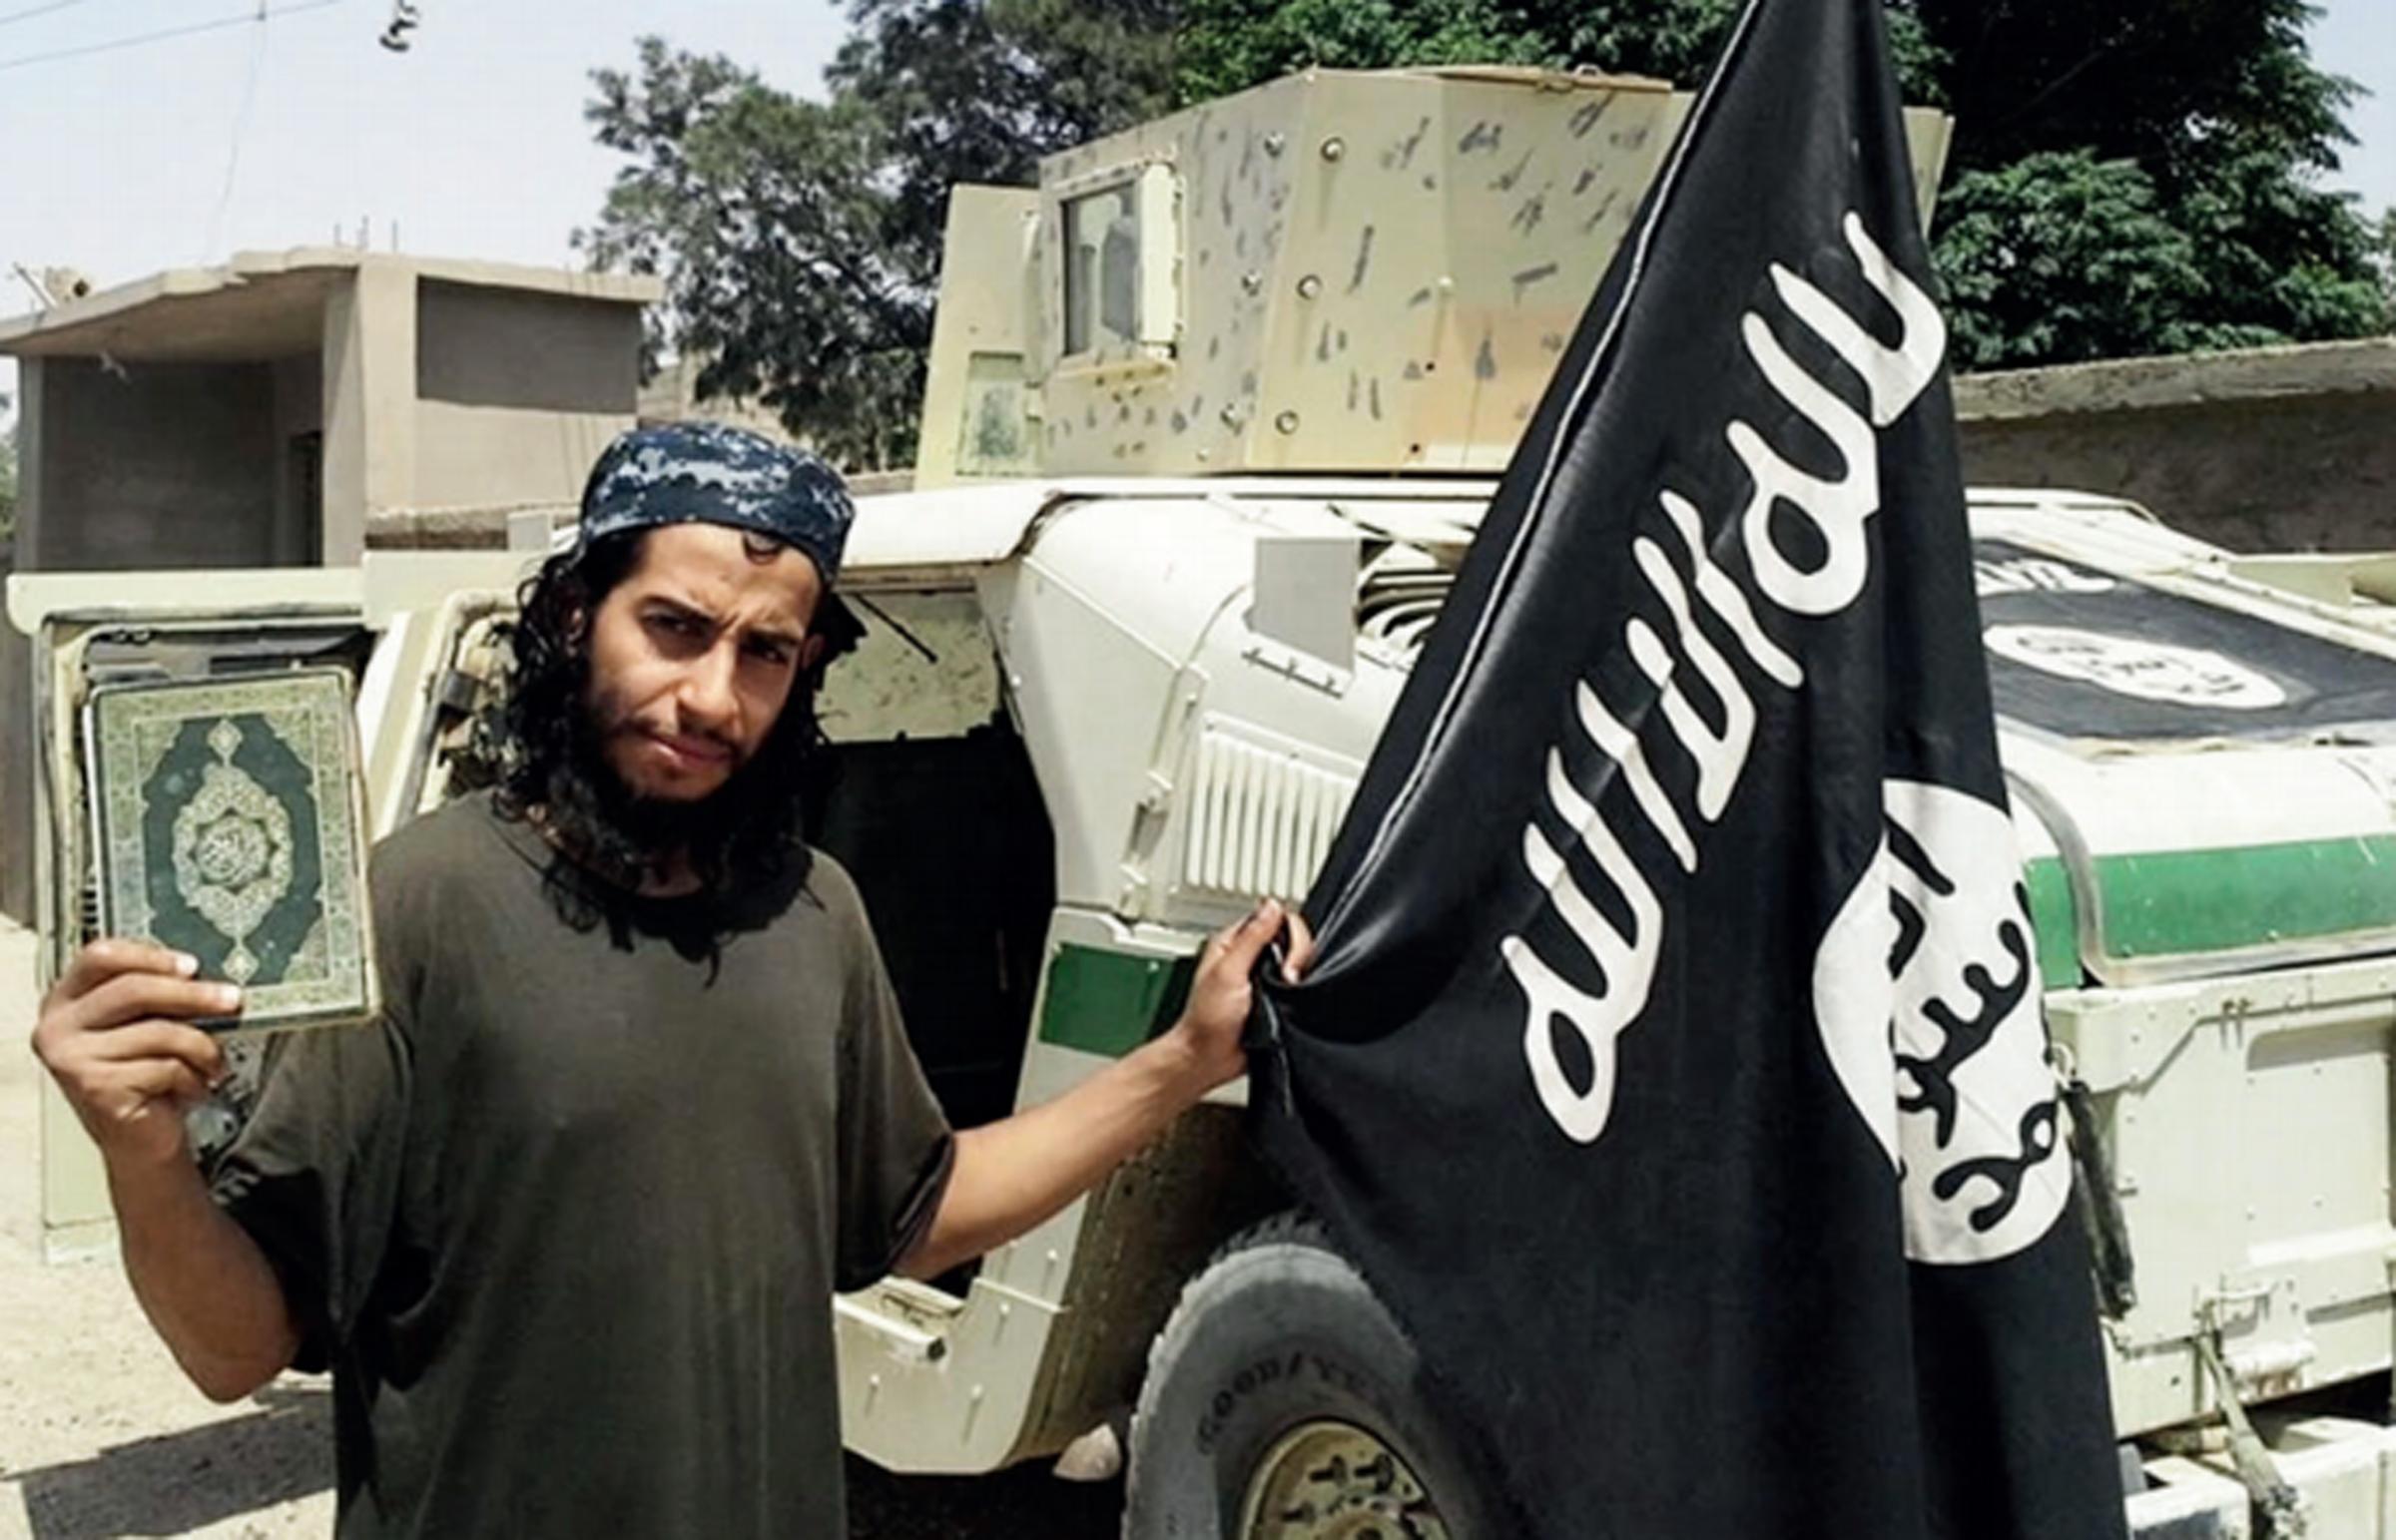 This undated image, which was obtained by AP from the Islamic State's English-language magazine Dabiq, shows Abdelhamid Abaaoud.